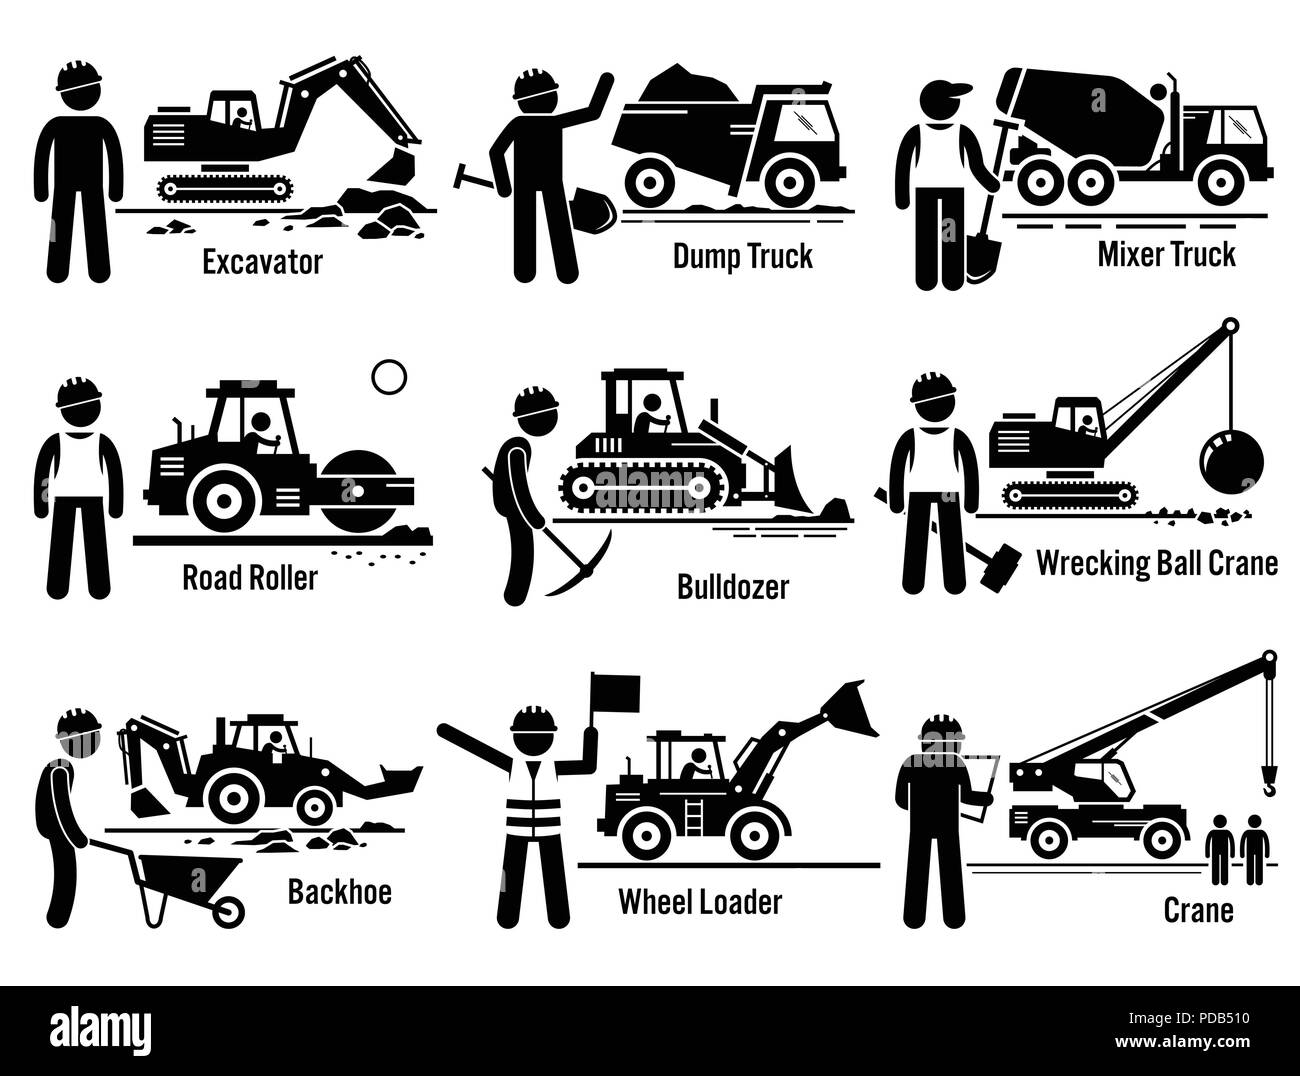 Construction Vehicles Transportation and Worker Set Stock Vector